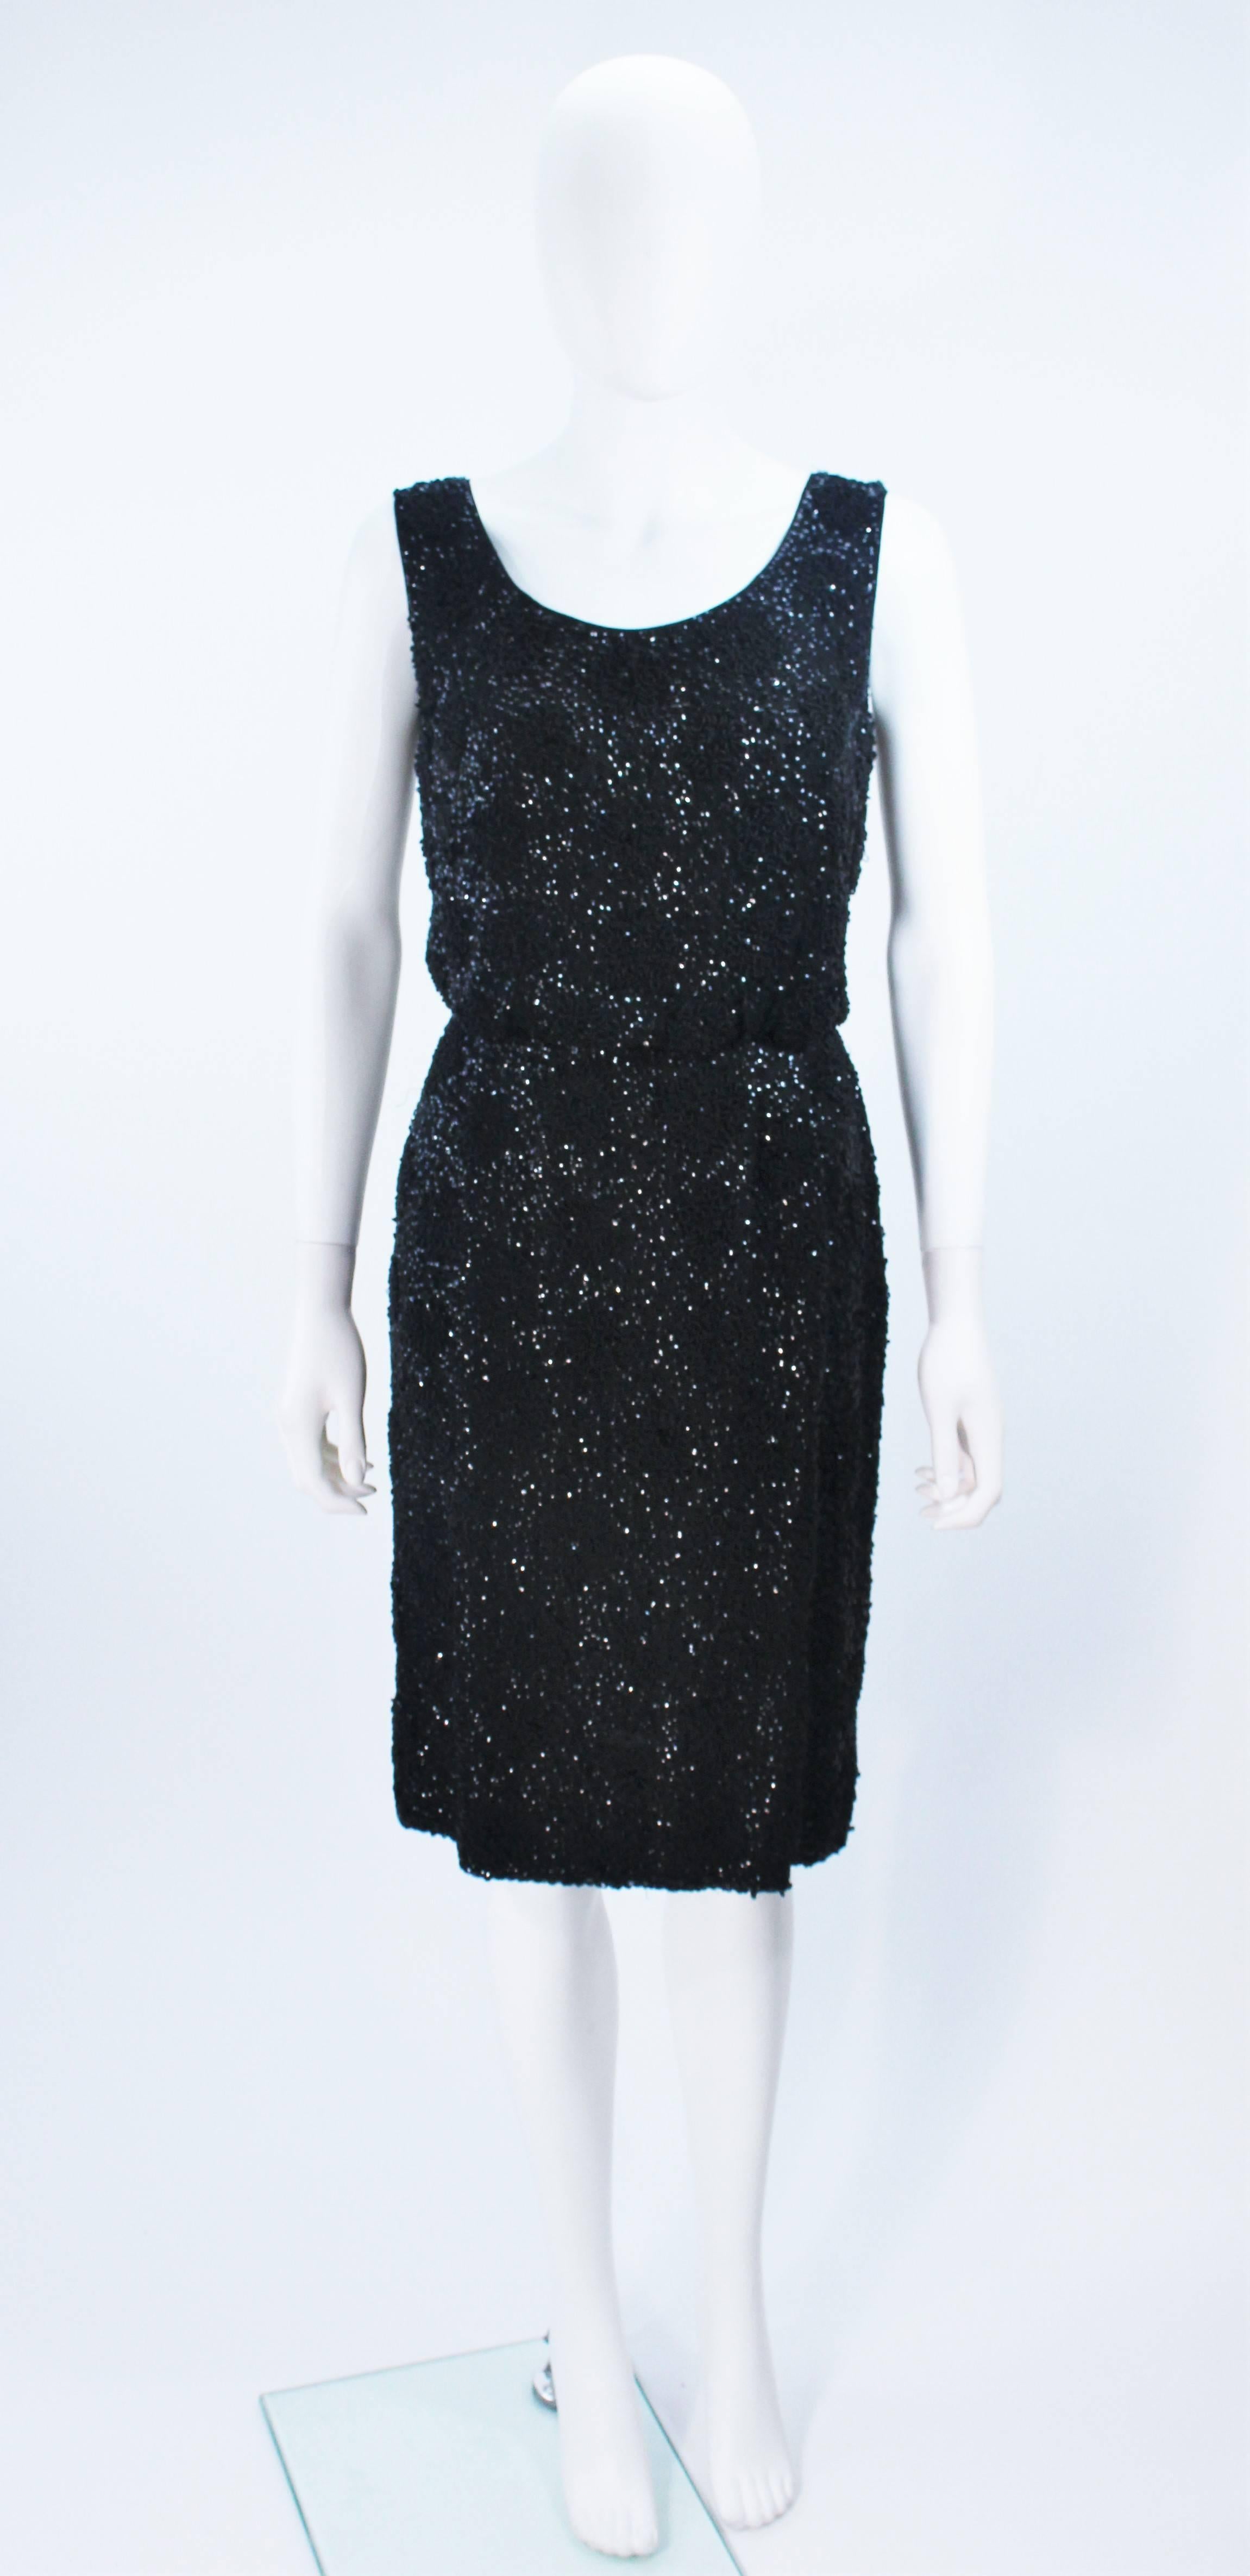  This cocktail dress is composed of a black silk chiffon with floral patterned beading throughout. There is a center back zipper closure. In great vintage condition. 

  **Please cross-reference measurements for personal accuracy. Size in